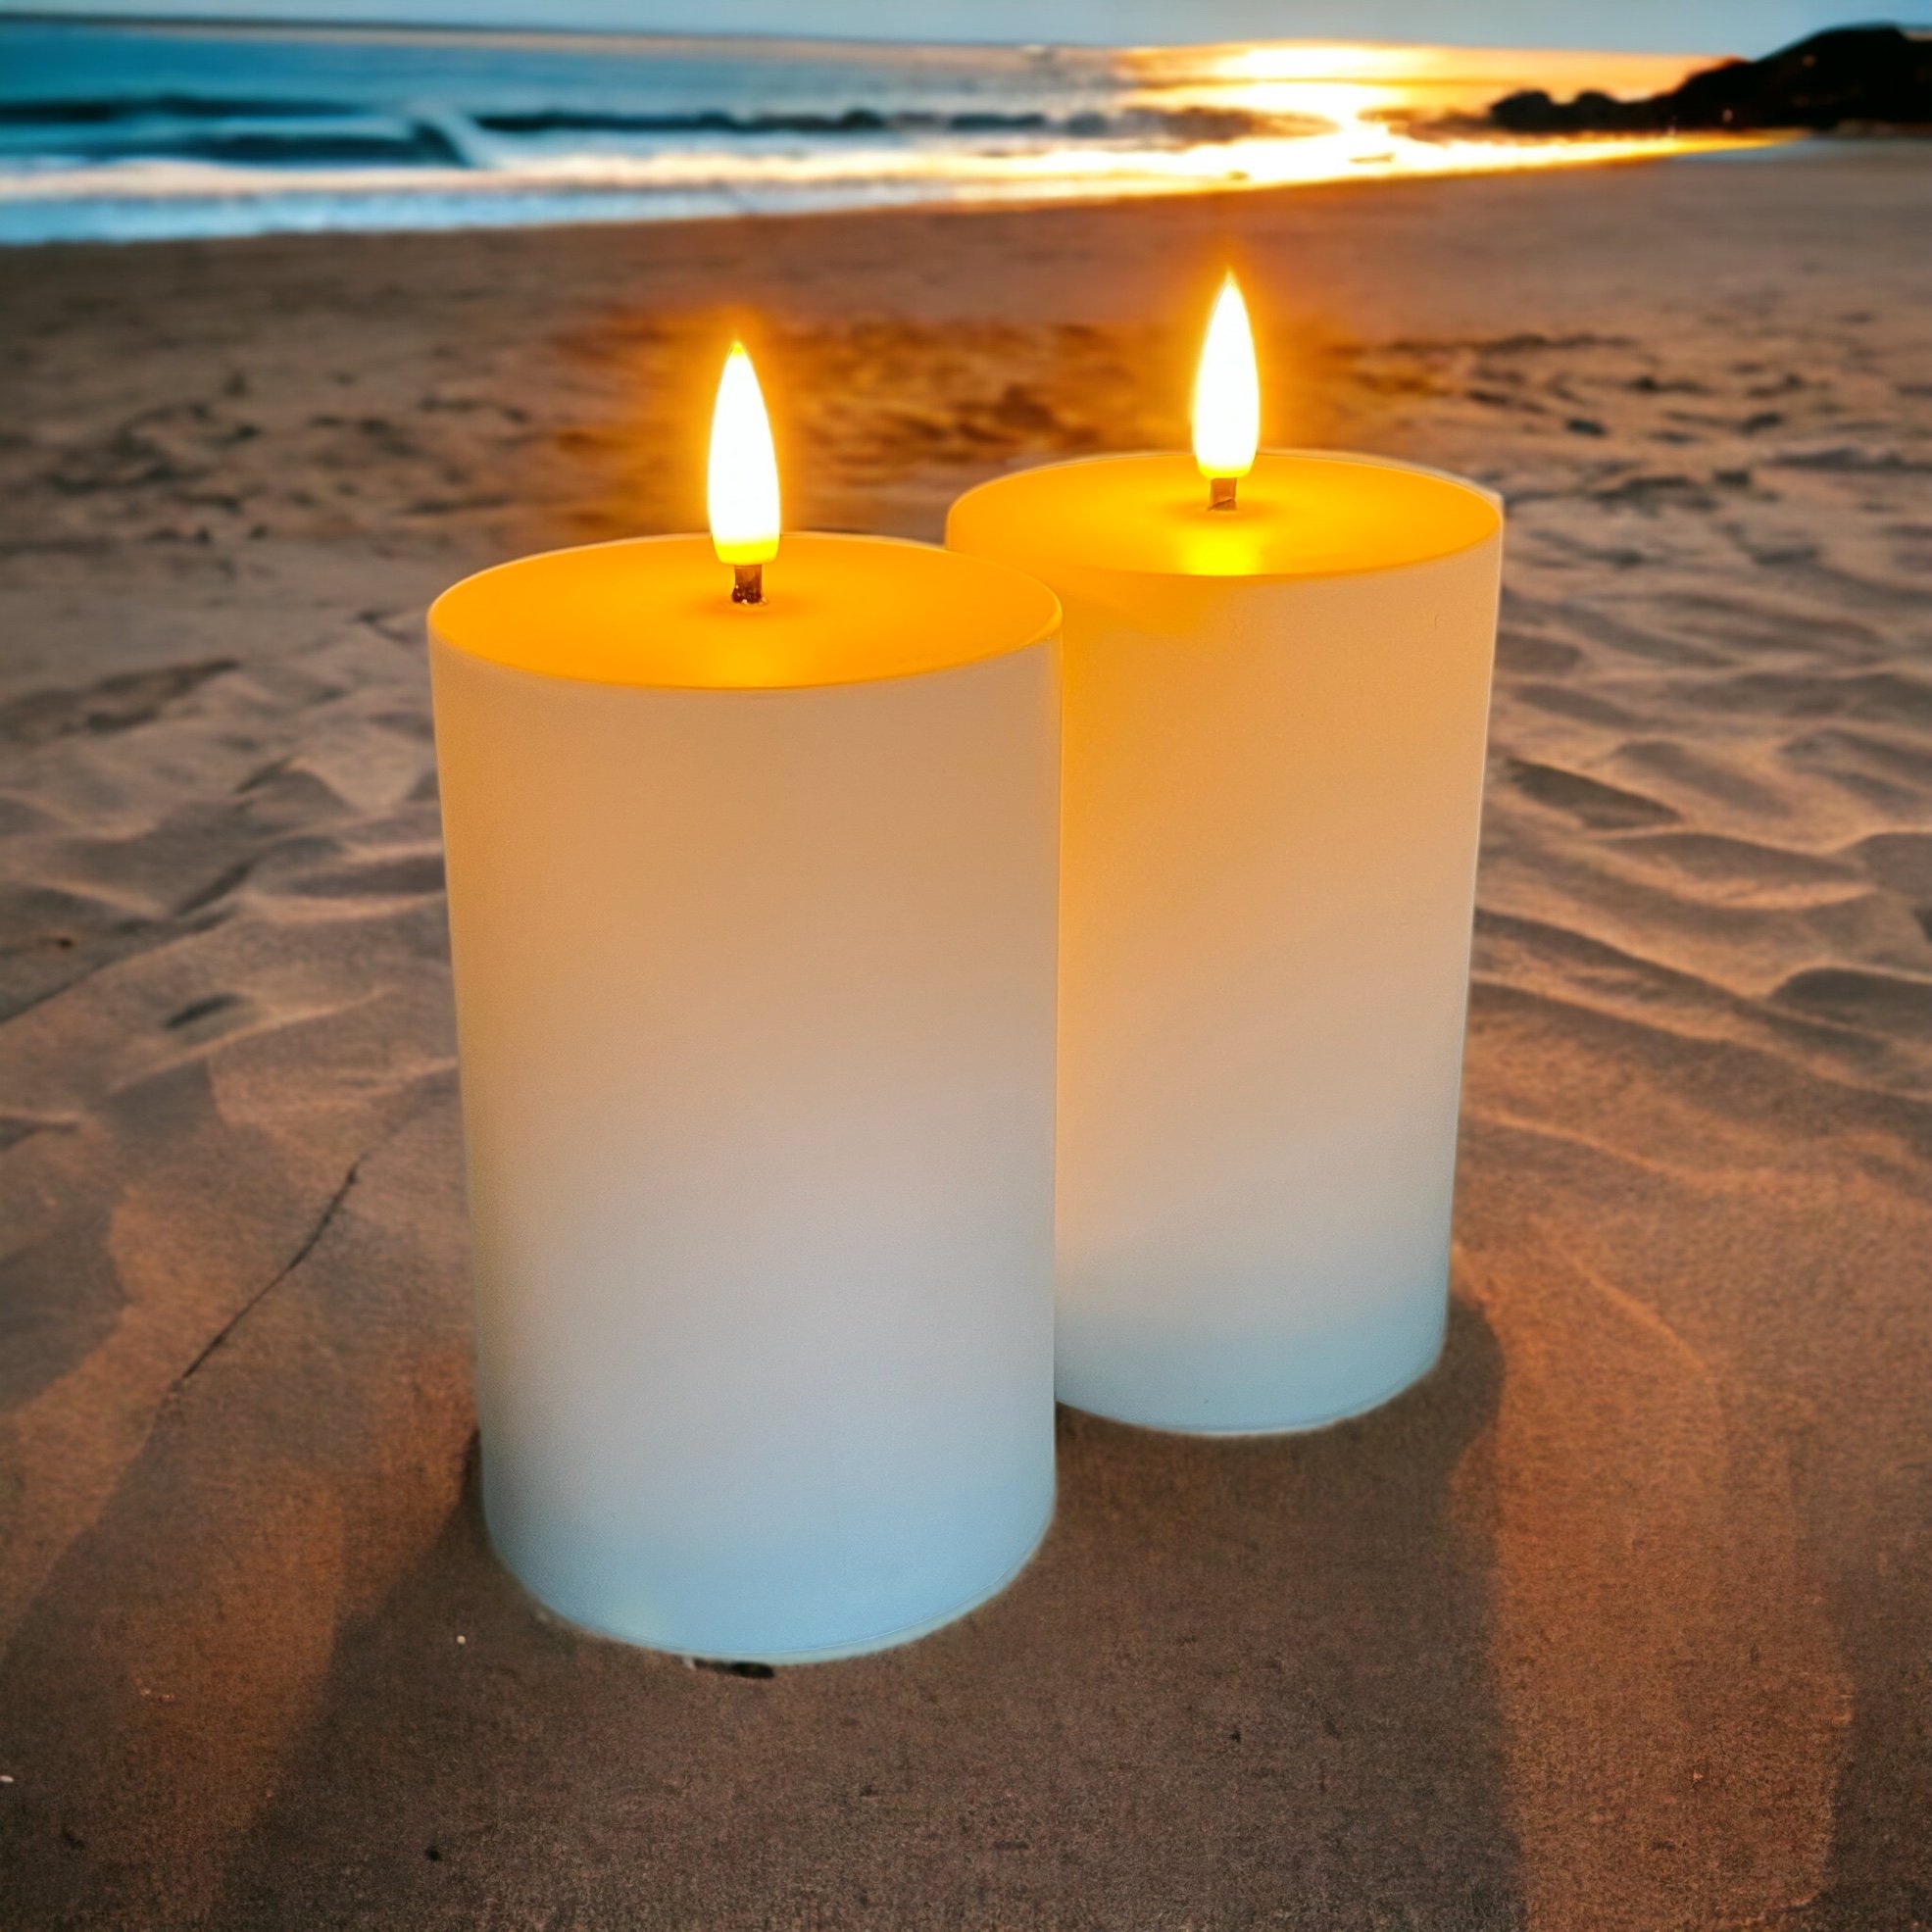 Led Flame Outdoor Candles 2 Pack With Remote Control